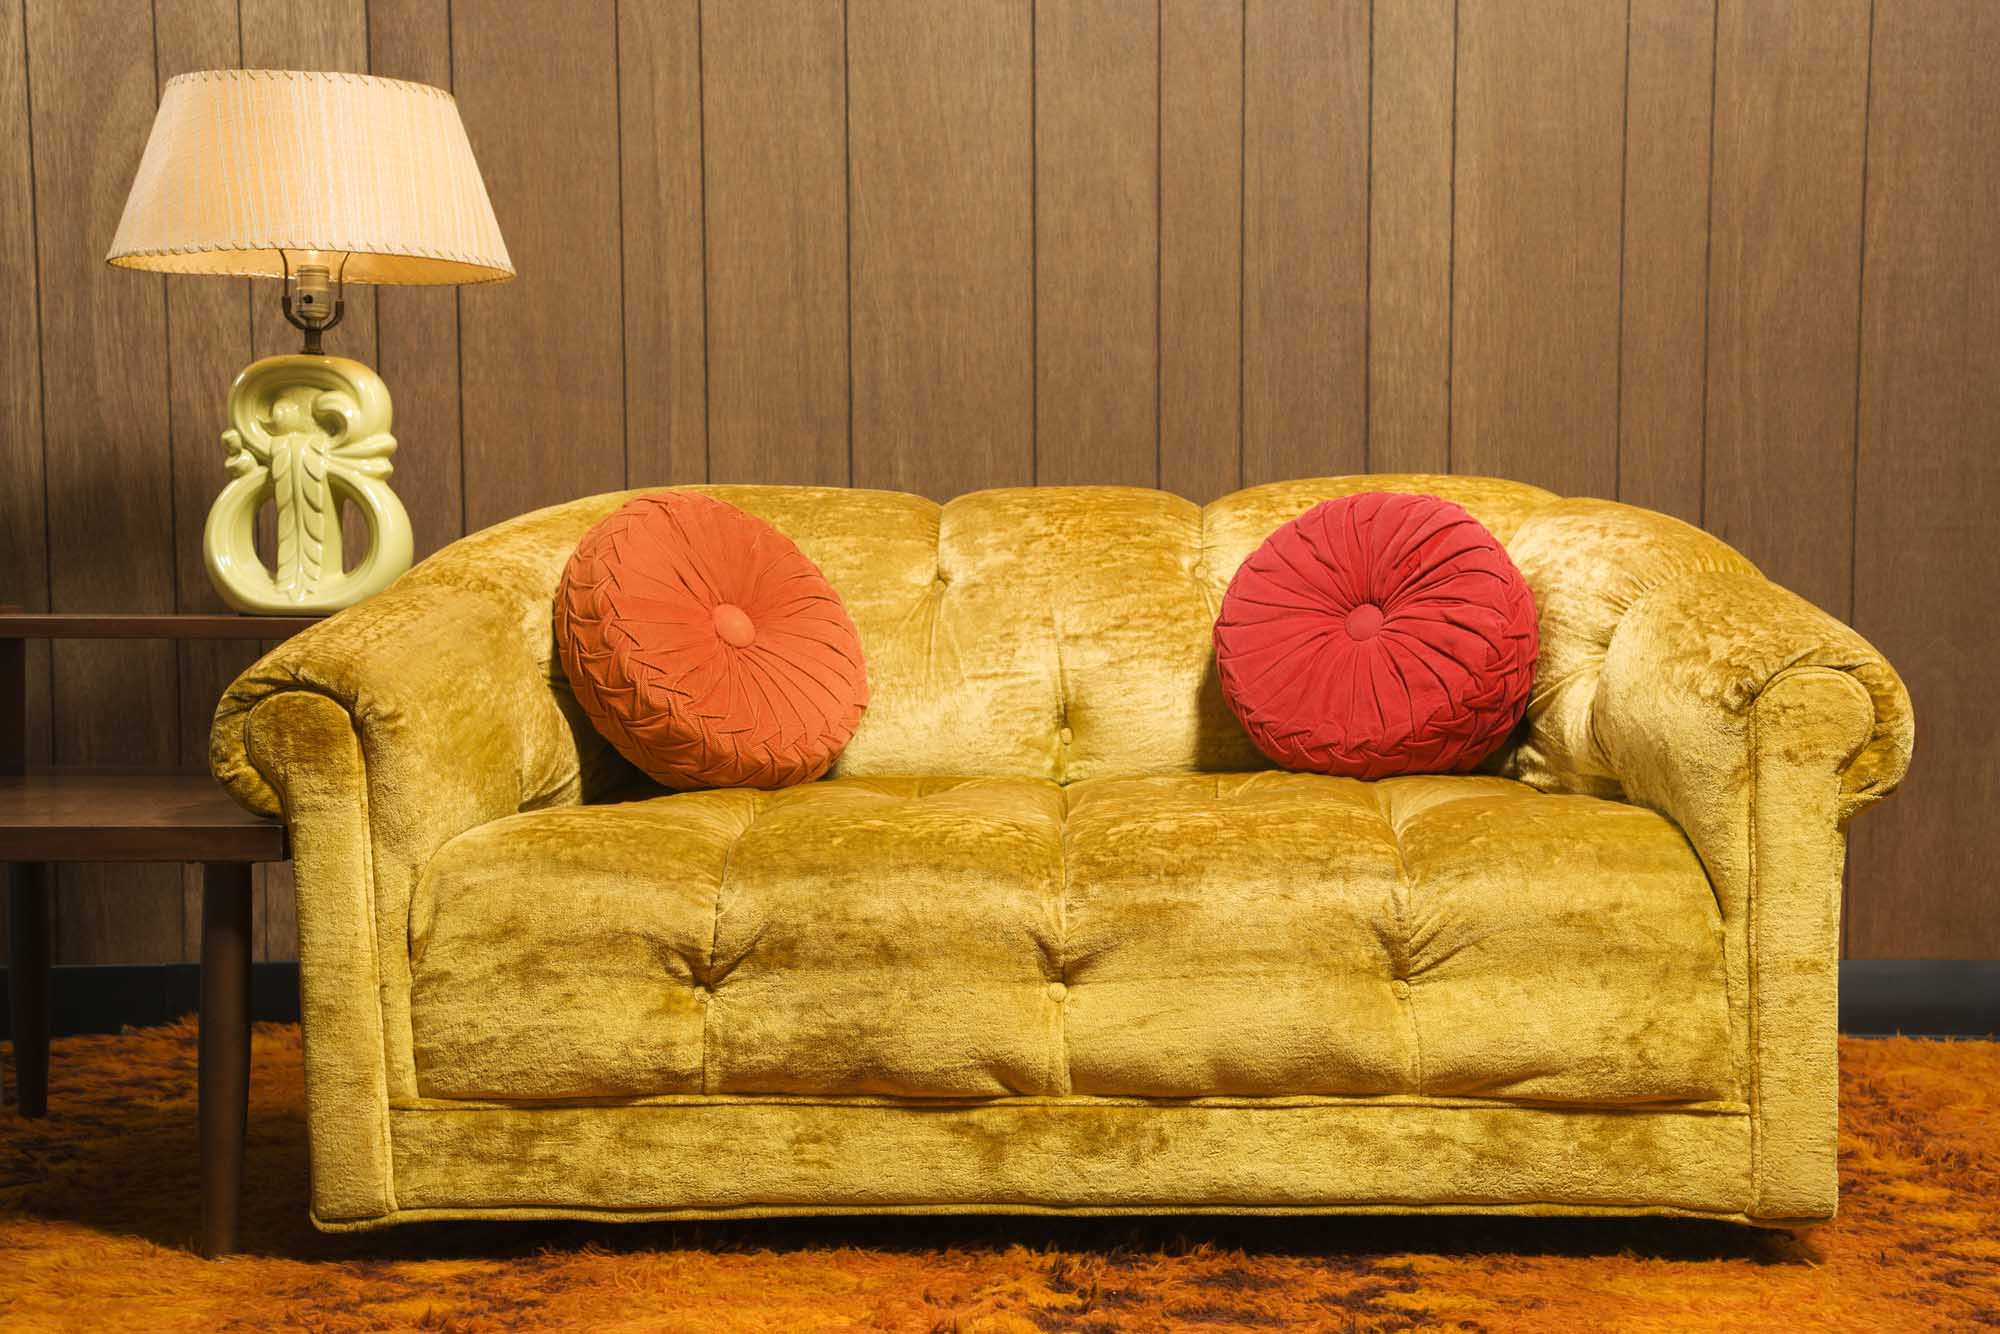 How To Make Your Old Sofa Look Brand New!